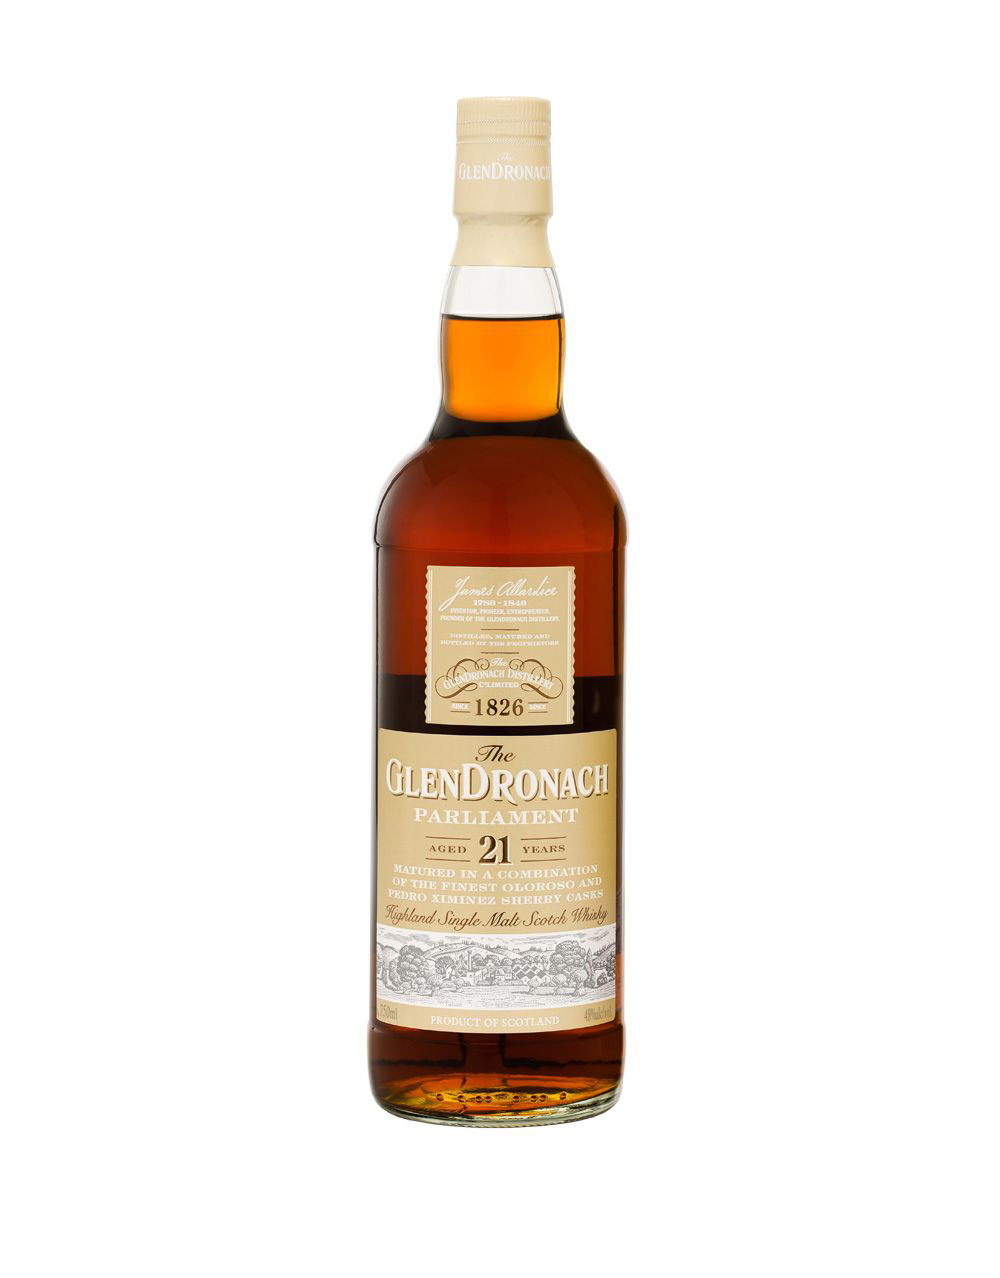 THE GLENDRONACH 21 YEAR OLD PARLIAMENT SCOTCH WHISKEY